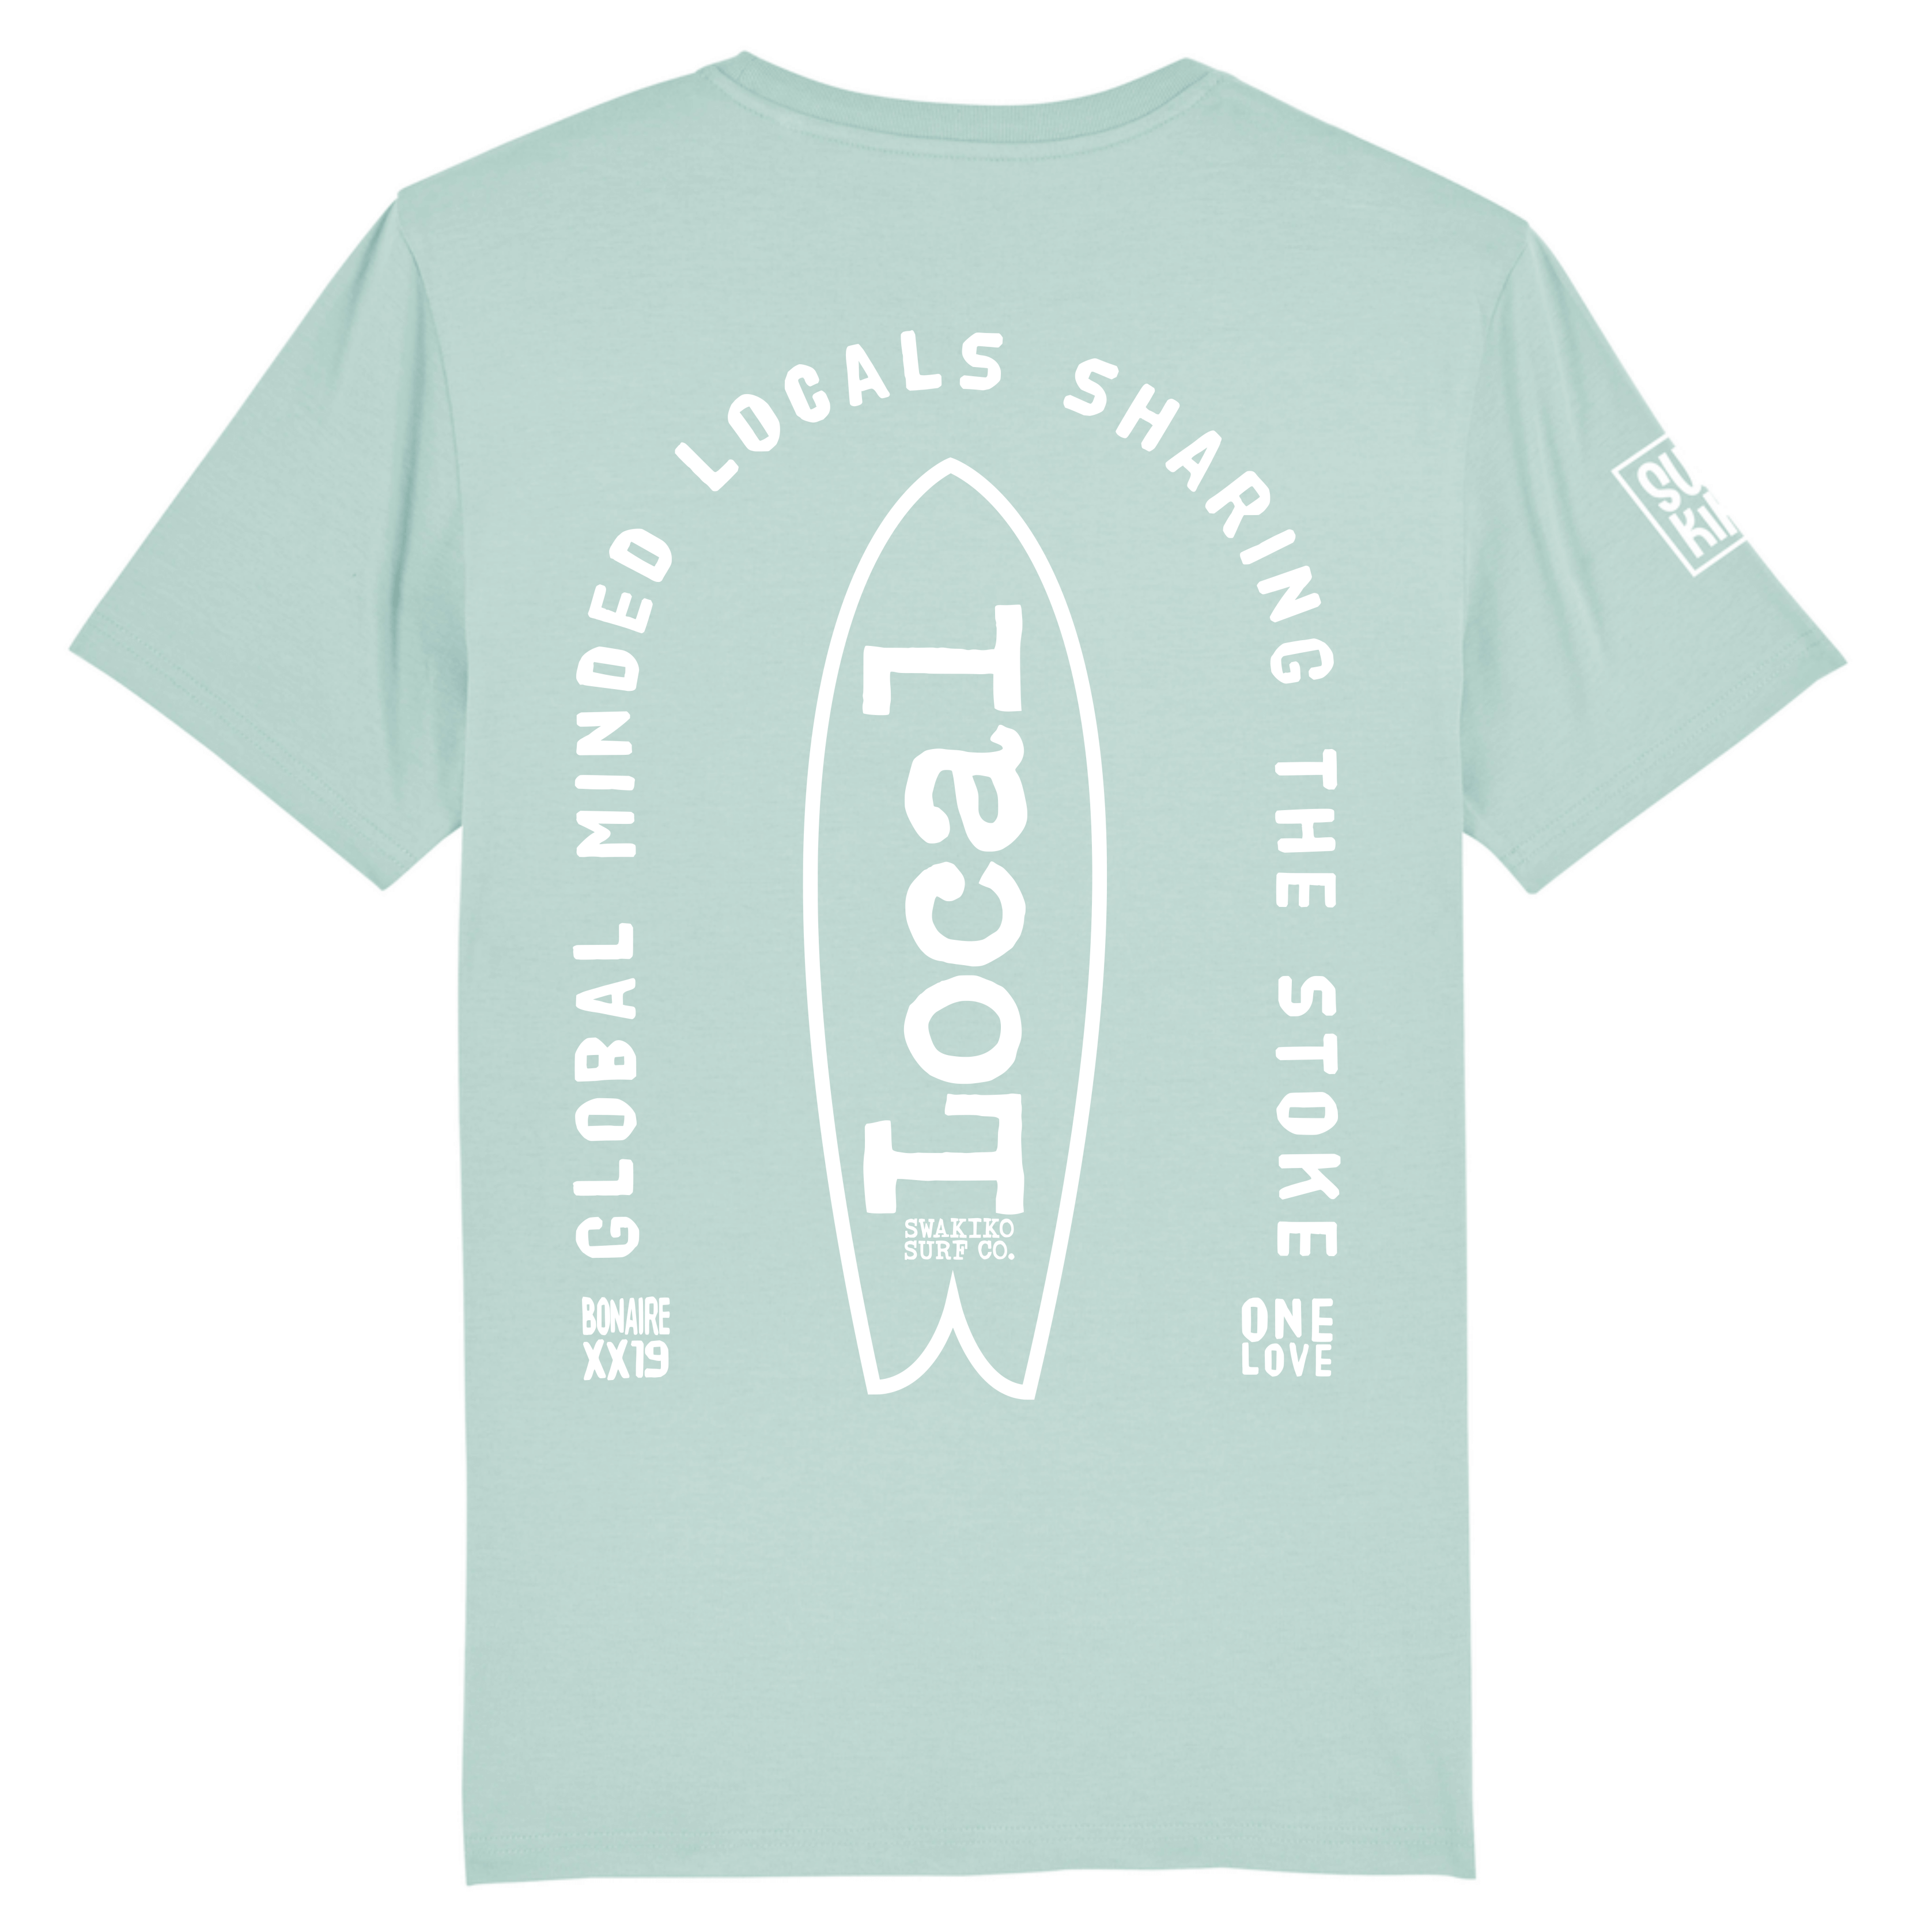 Stoked Locals T-shirt, turquoise